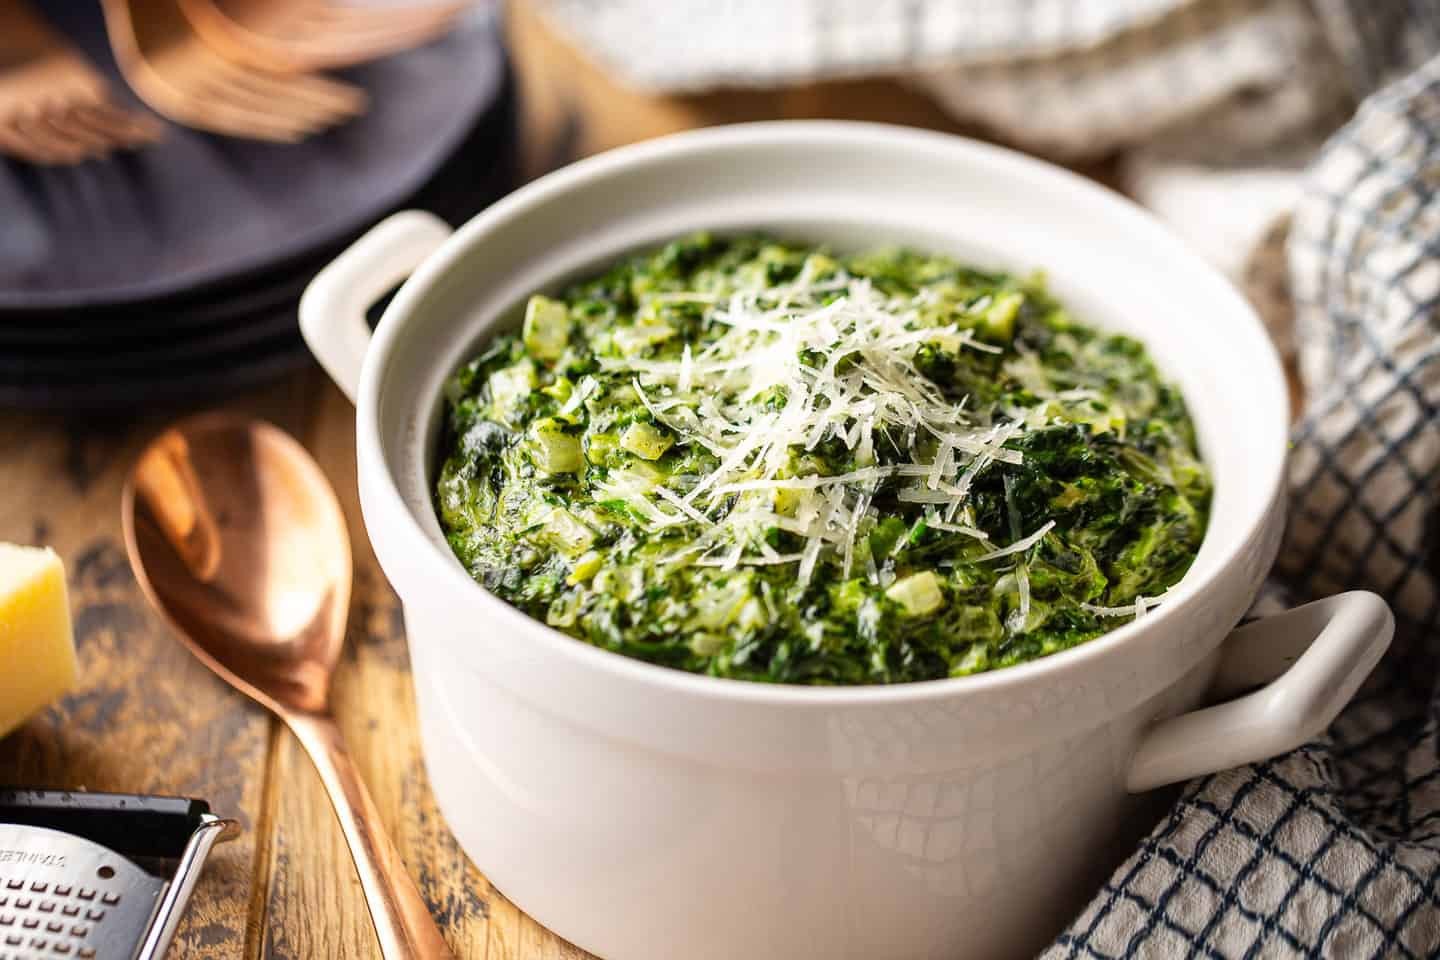 Cream spinach recipe, prepared and presented in a white serving dish with grated parmesan on top.